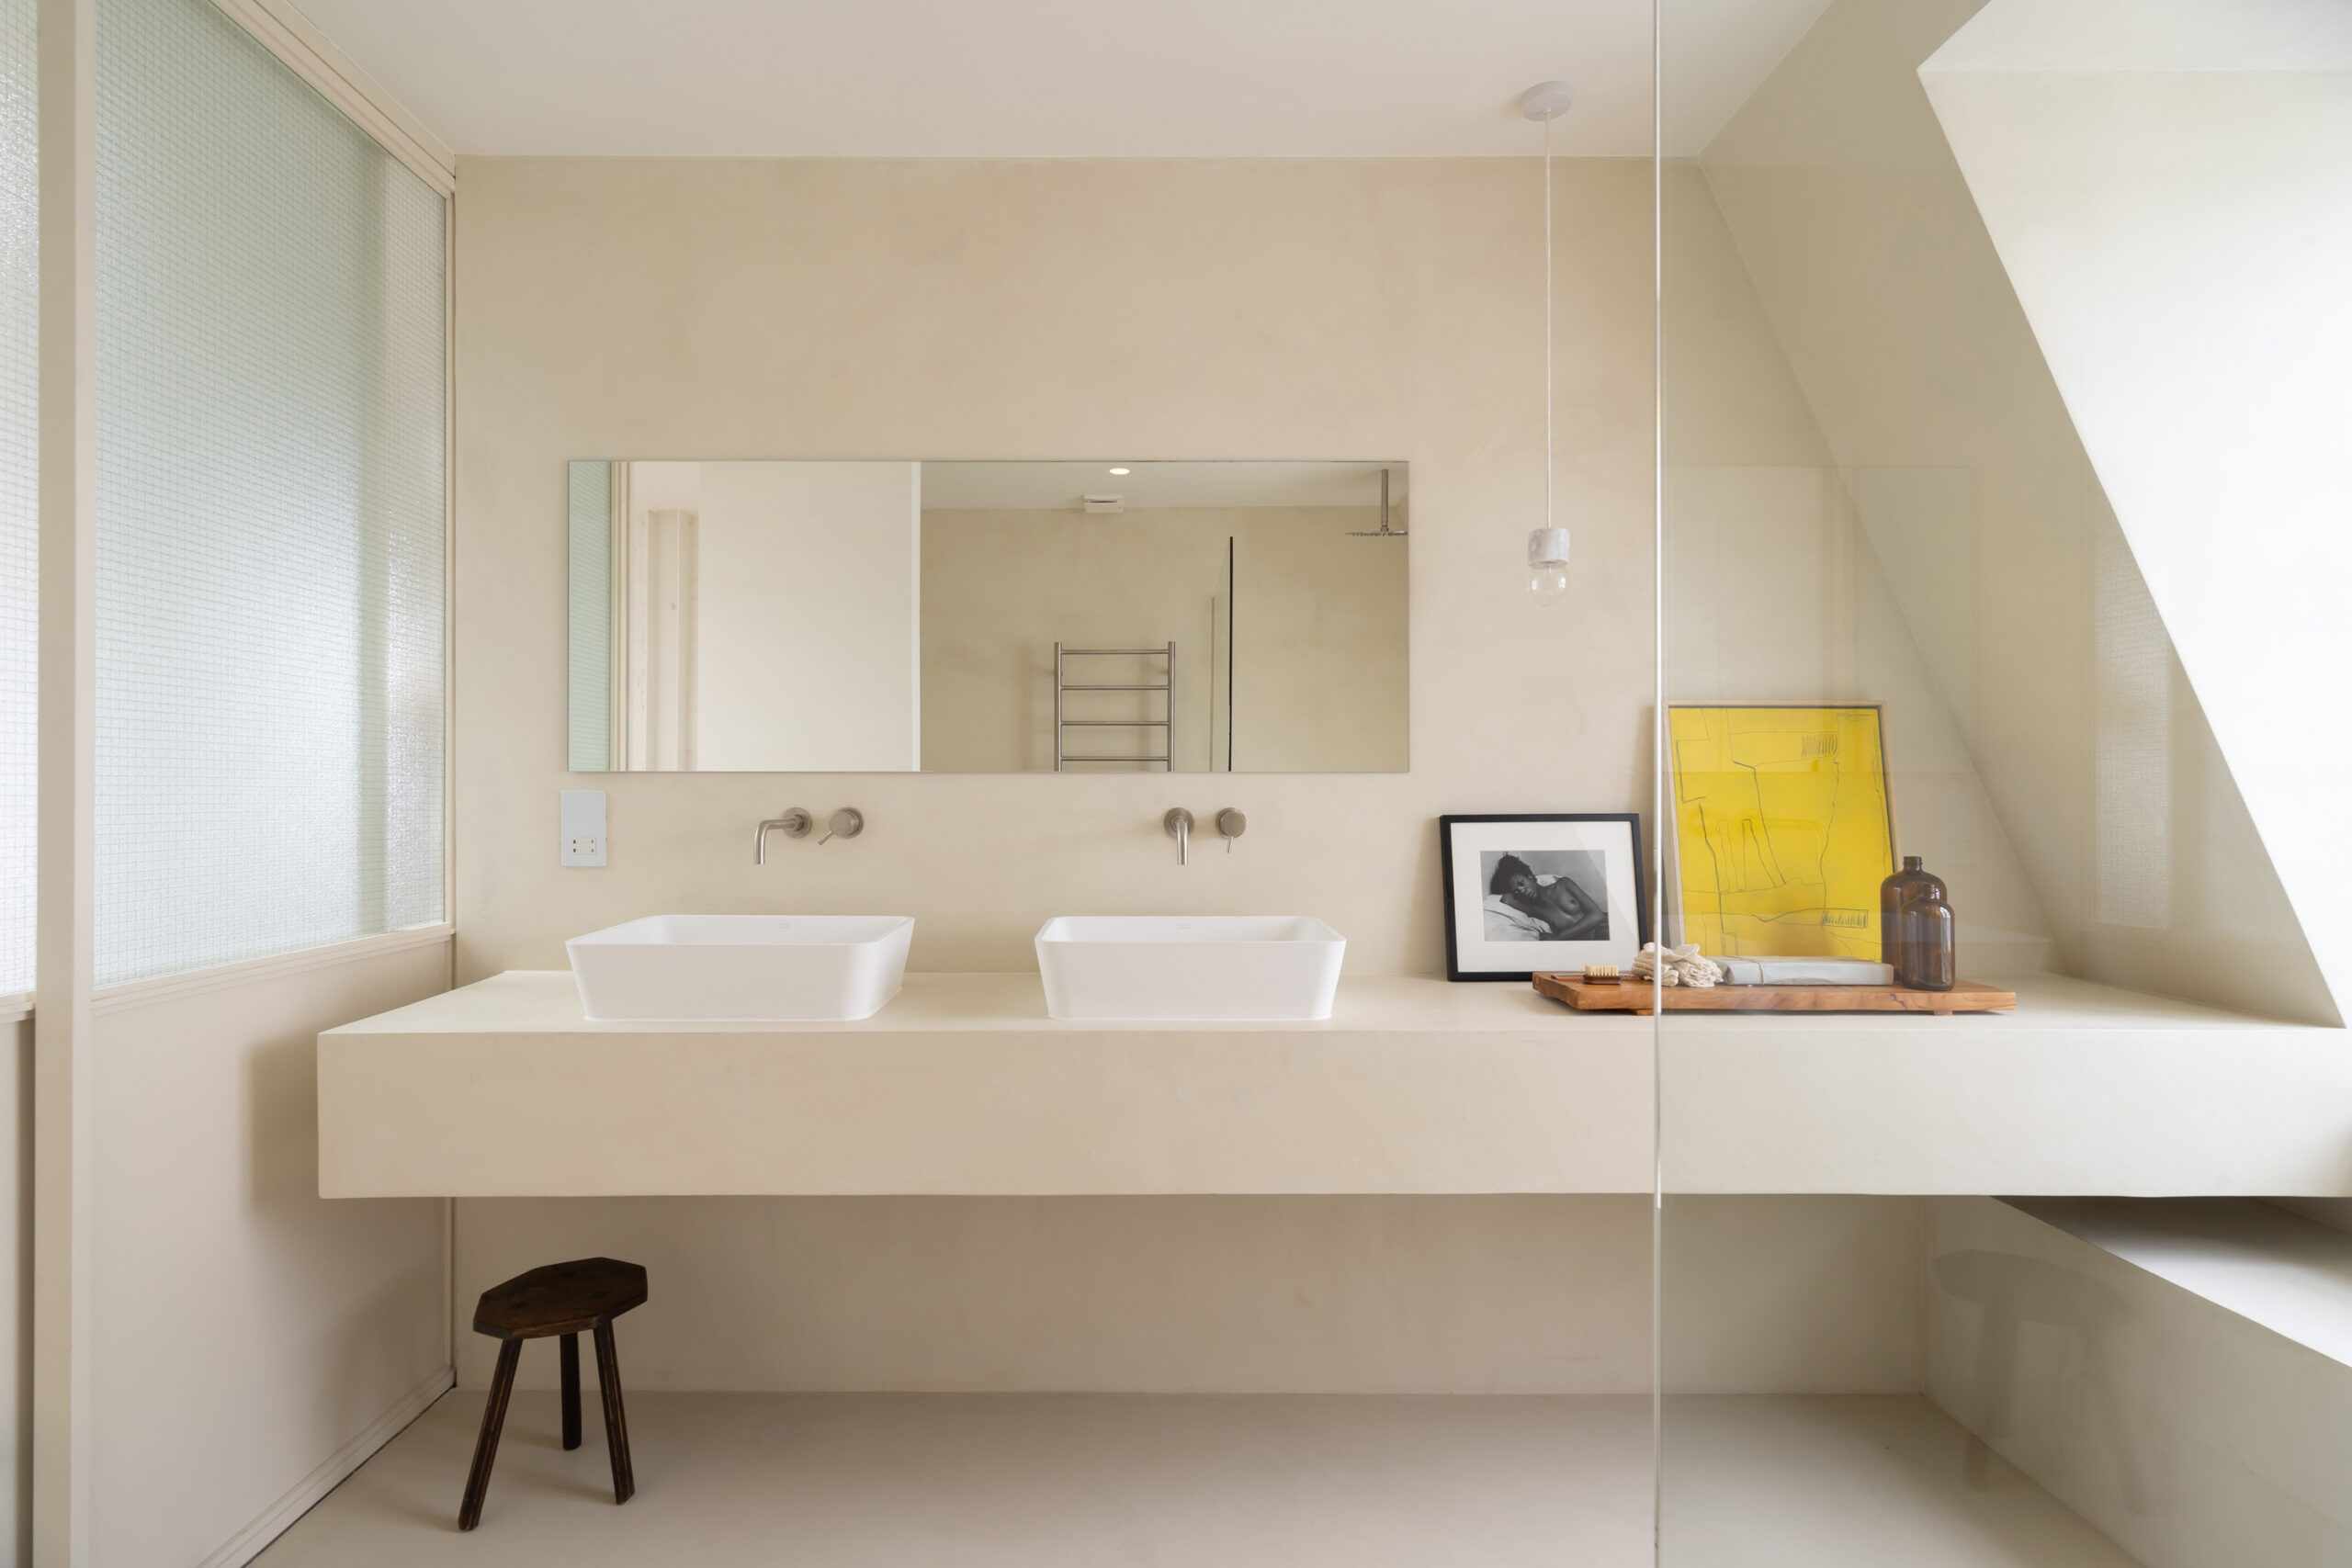 For Sale: Durham Terrace Notting Hill W11 luxury bathroom with dual vanity